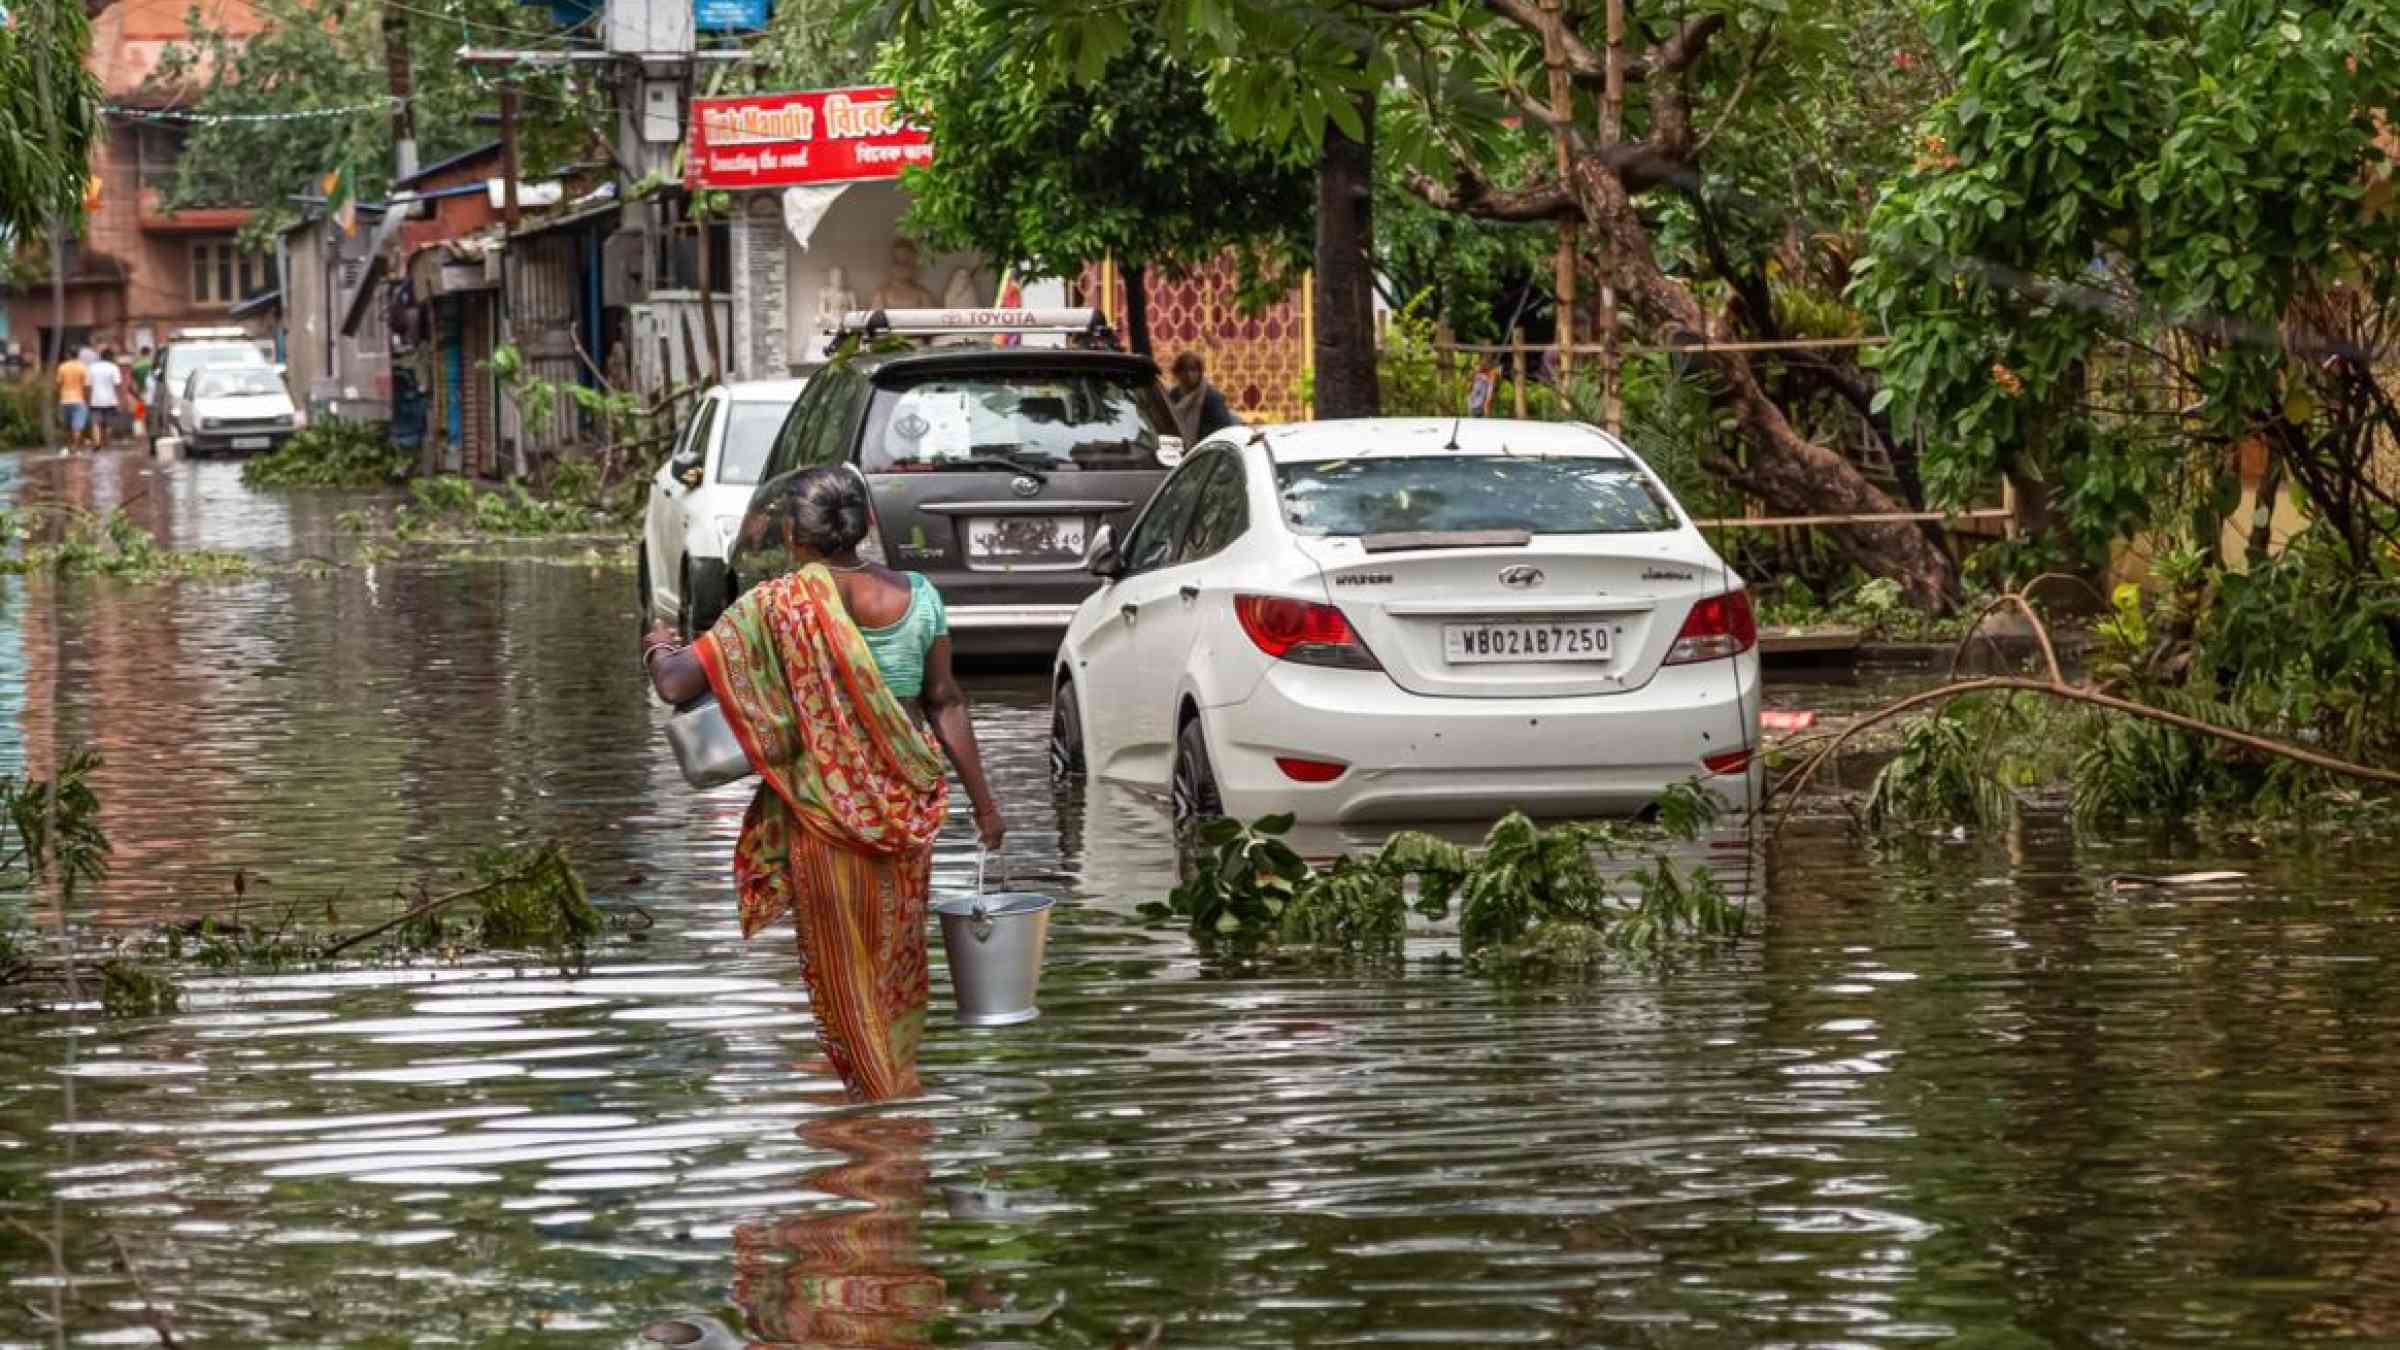 The impact of cyclone Amphan in Kolkata, India (May 2020). Roop_Dey/Shutterstock